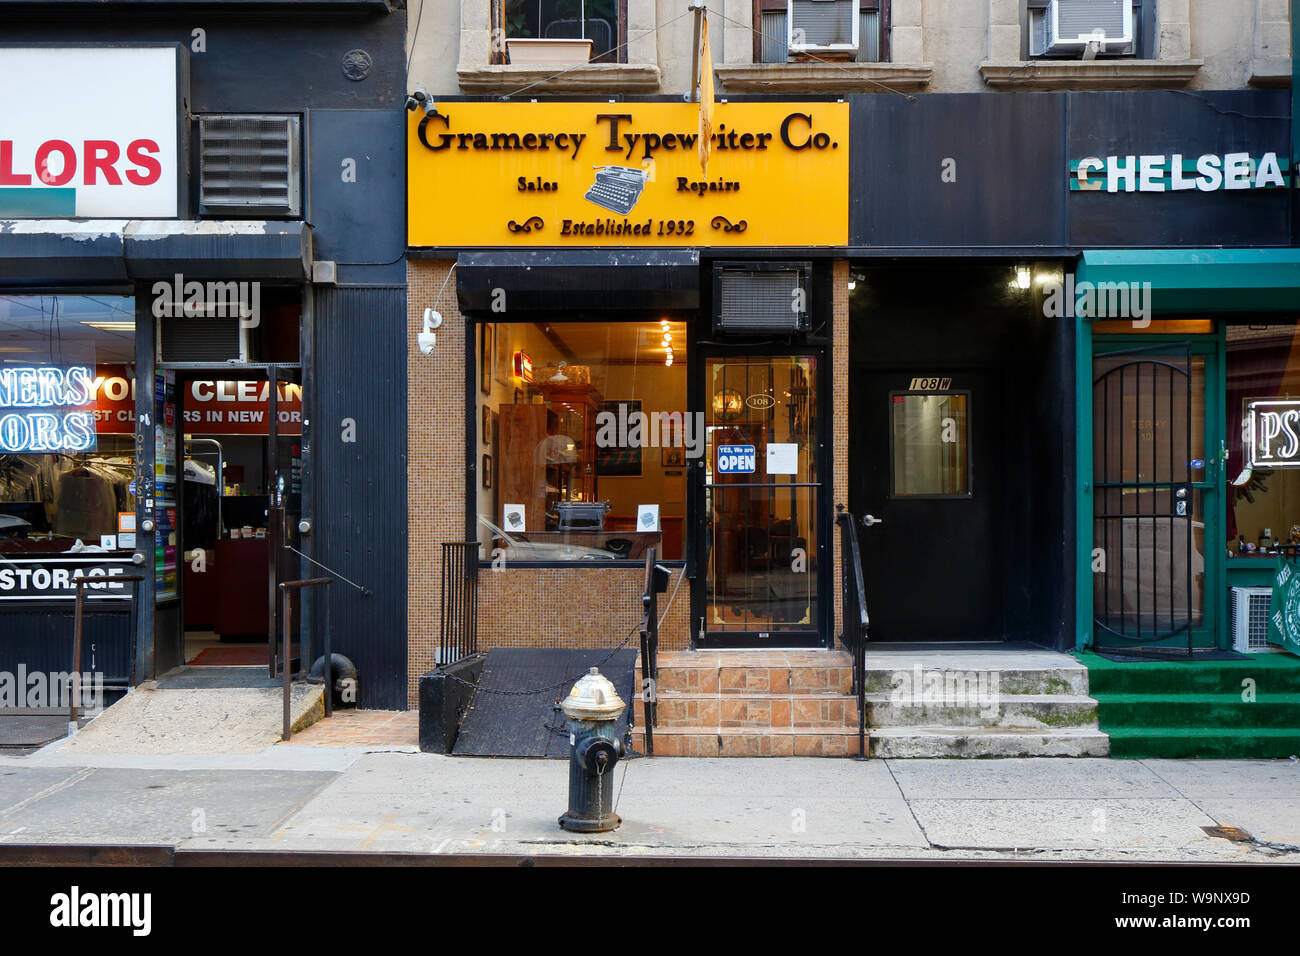 Gramercy Typewriter Company, 108 W. 17th Street, New York, NY. exterior storefront of a repair shop in the Chelsea neighborhood of Manhattan. Stock Photo